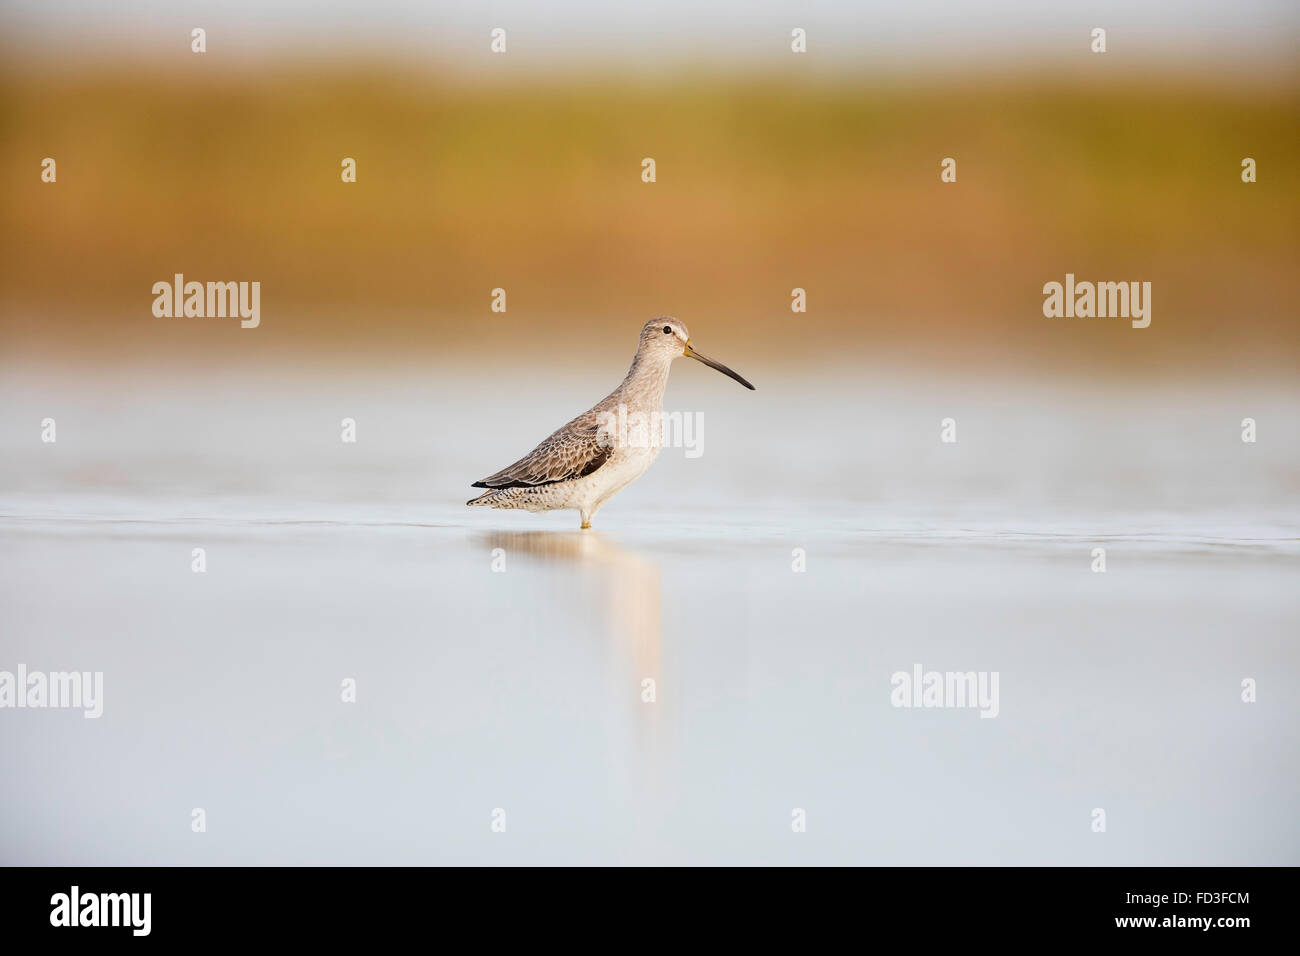 Short-billed Dowitcher standing / wading in a shallow water at the Fort De Soto Park, Florida Stock Photo